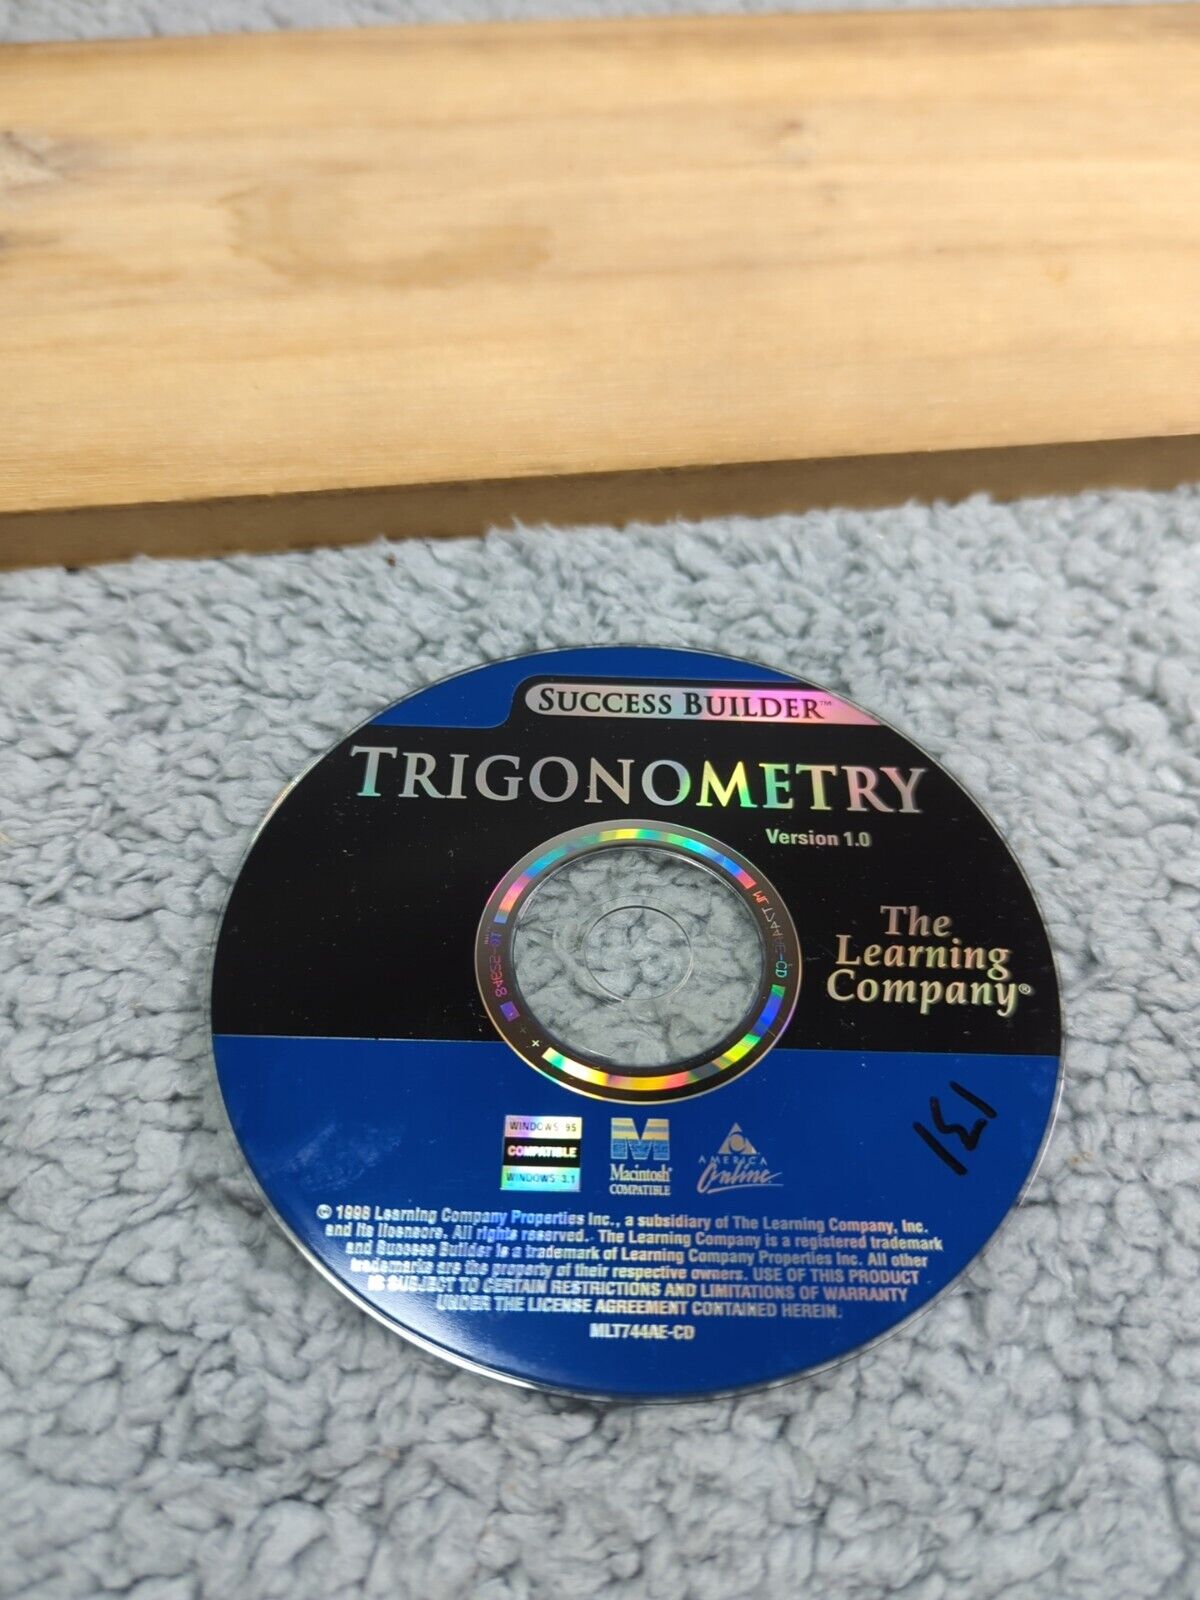 Princeton Review Trigonometry Test Prep Learning Company CD ROM (1998) Disc Only